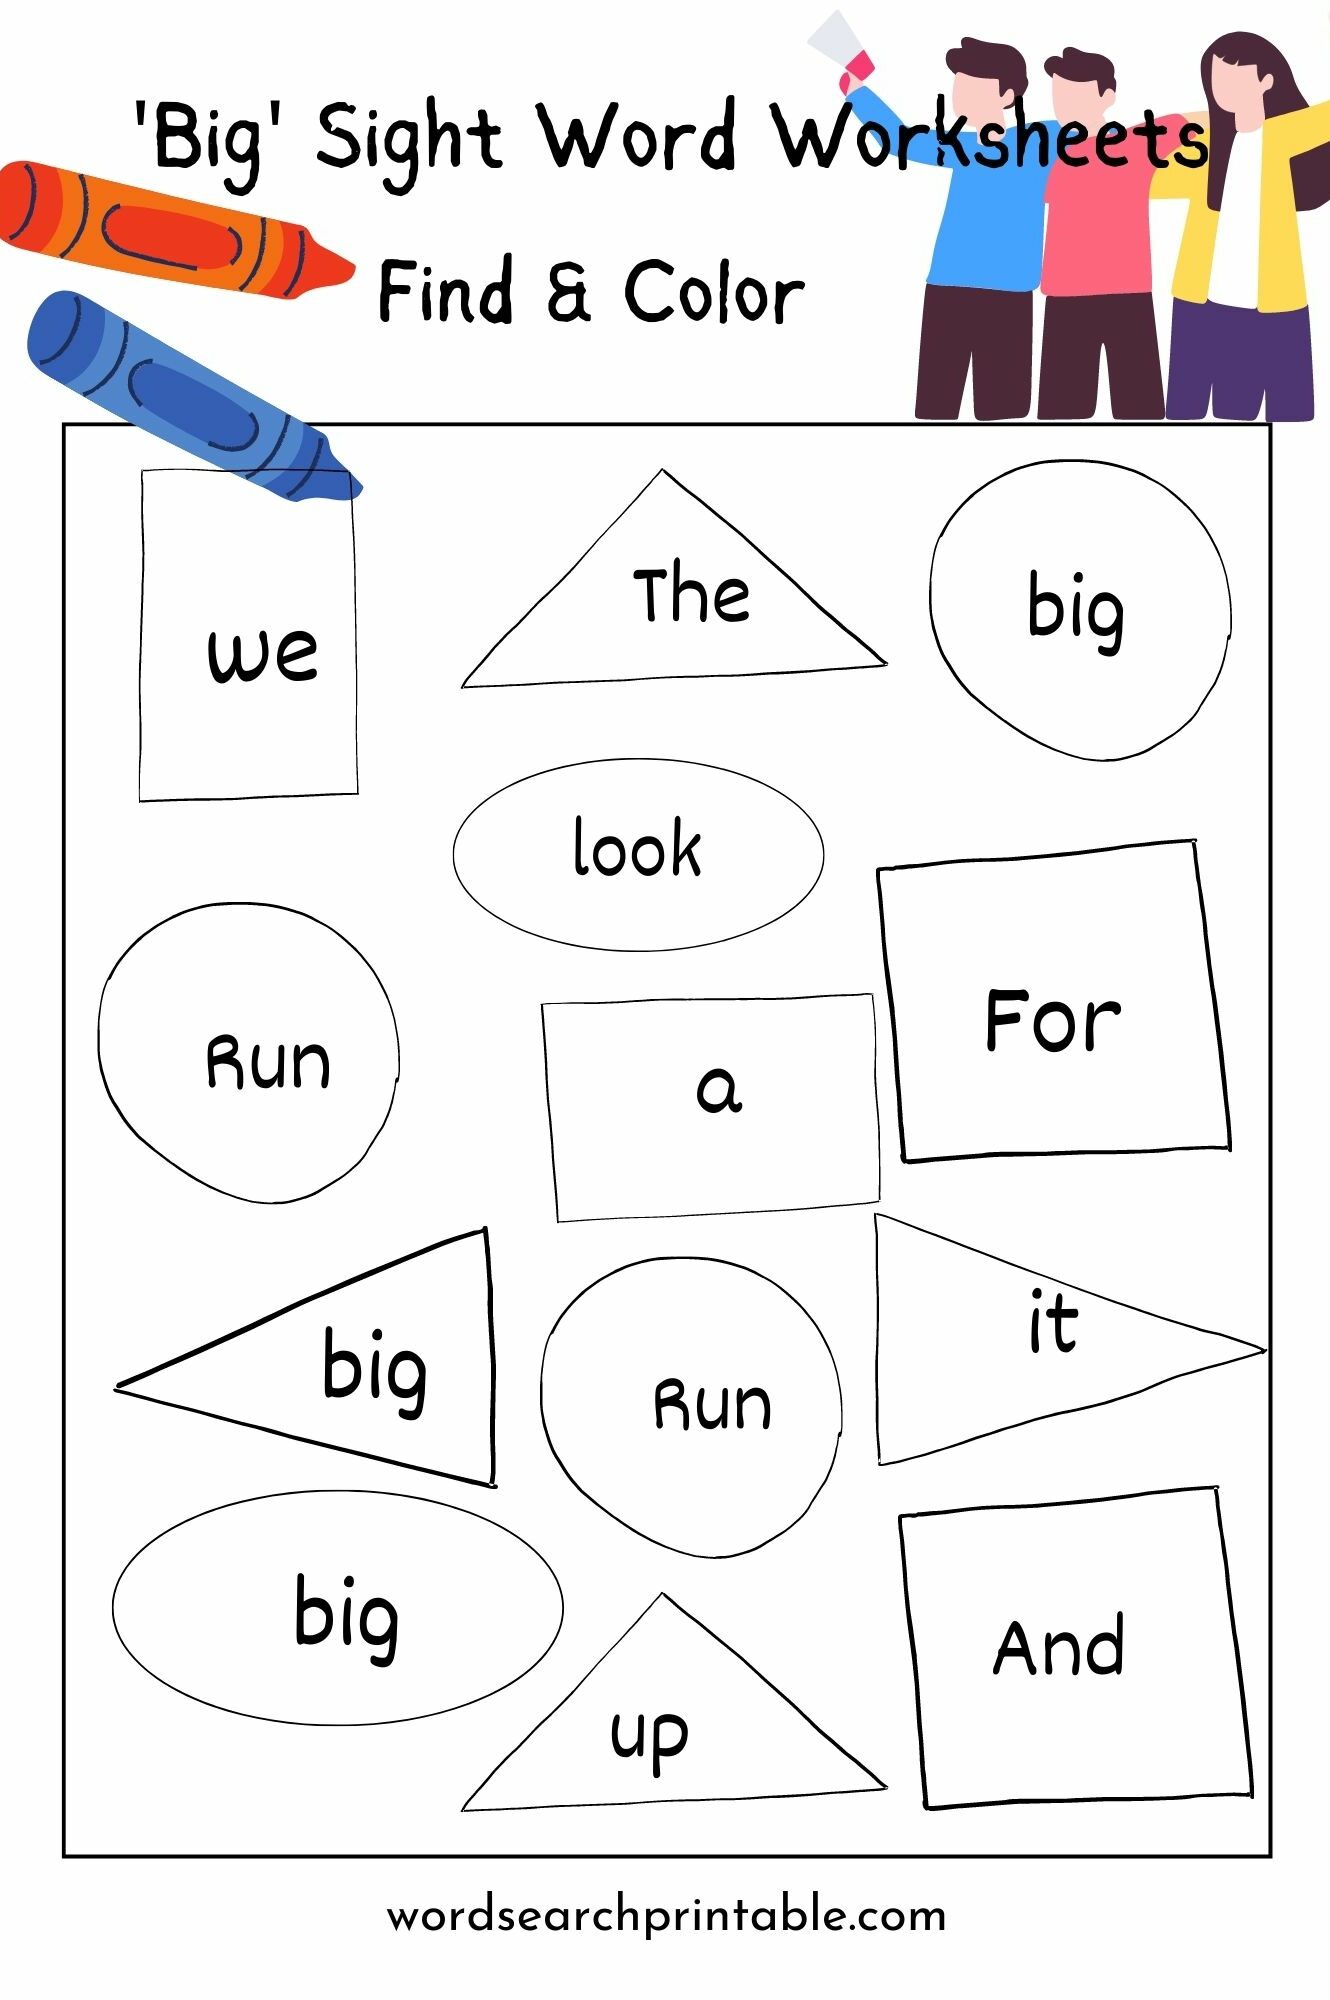 Find ‘Big’ and Color the box